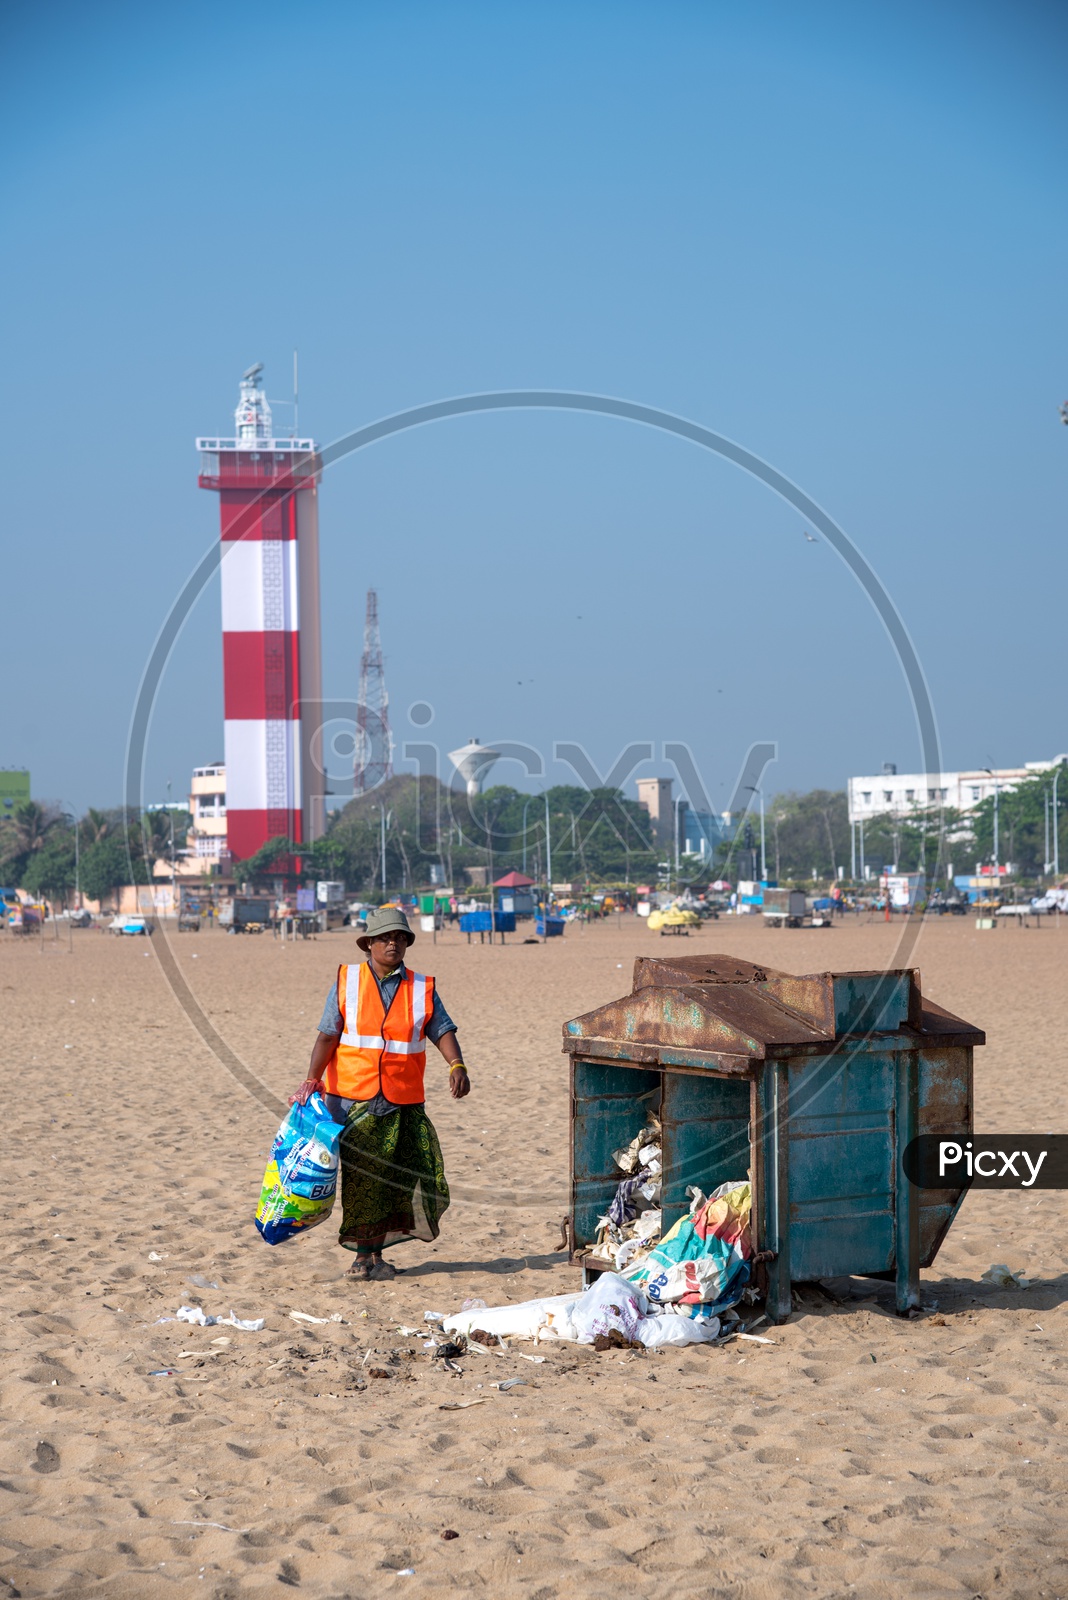 A muncipality worker cleaning off the beach